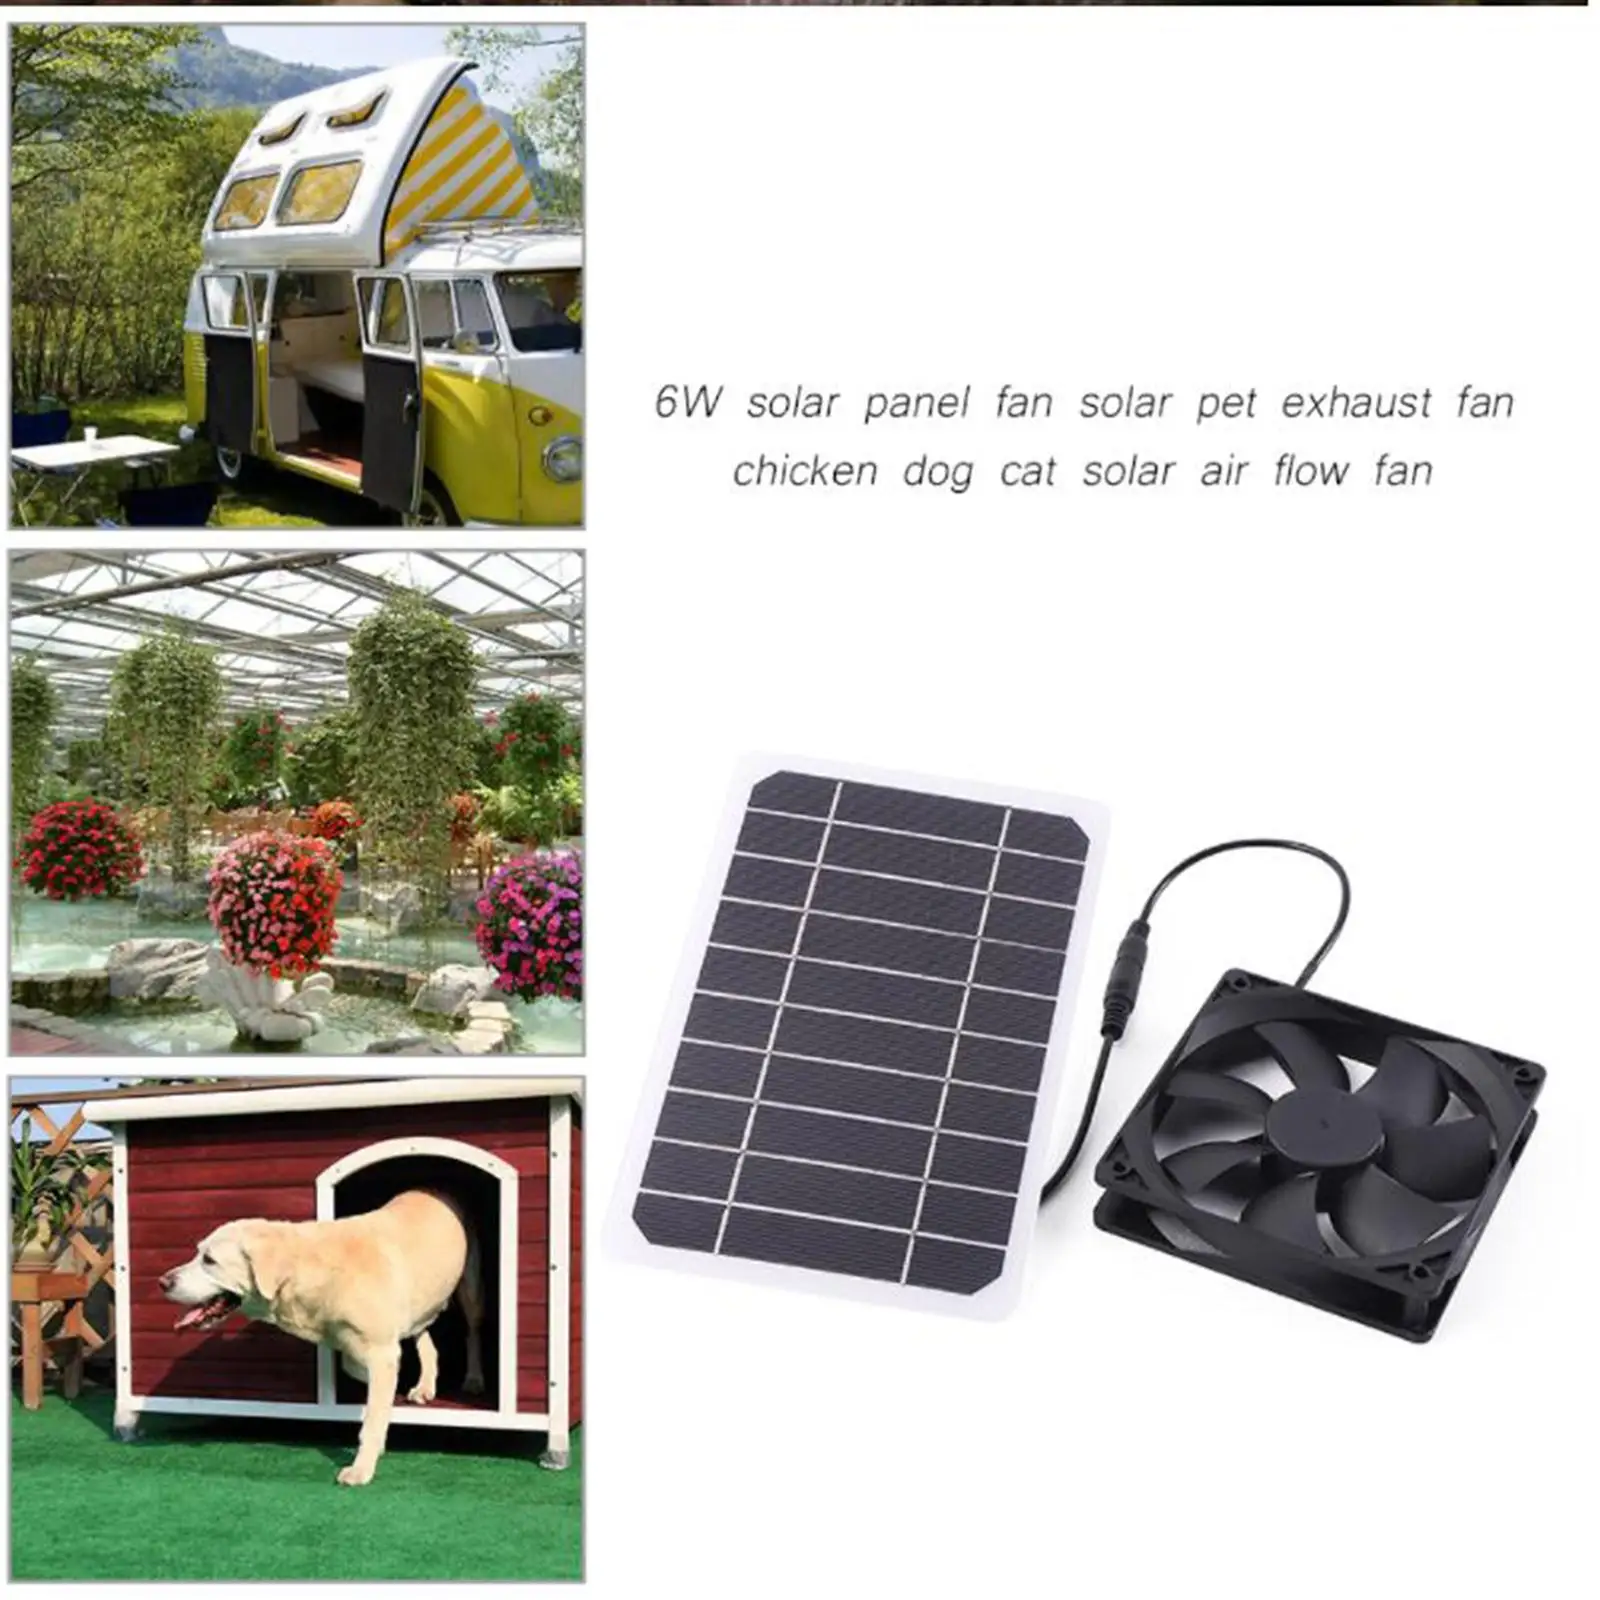 Outdoor Solar Powered Panel Fan Solar Powered Fan Cooling Ventilation for Chicken Coop Pet Houses Camping Greenhouse RV Roof